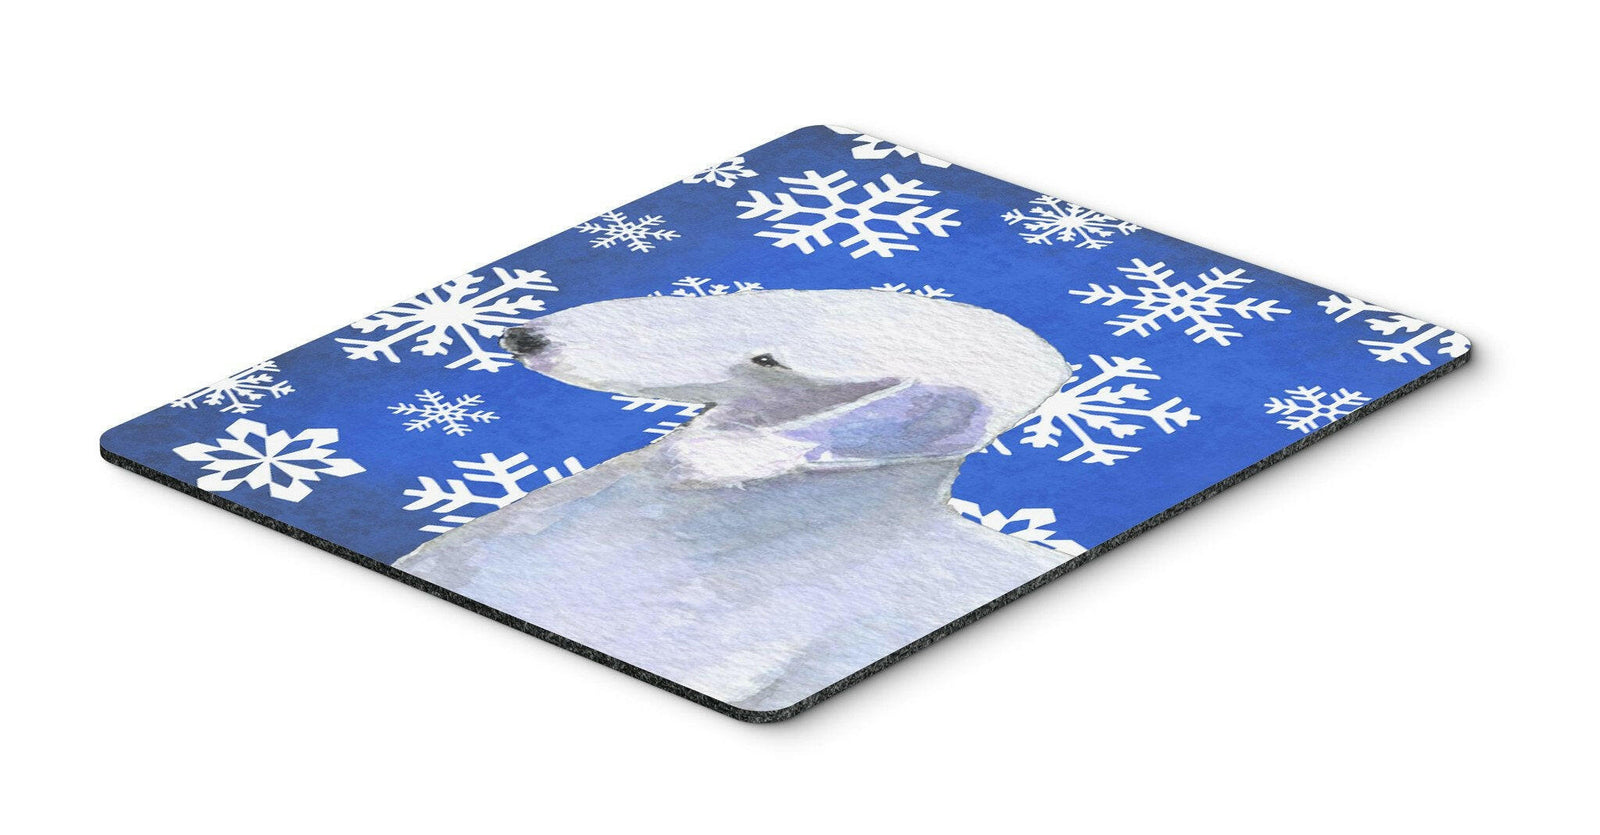 Bedlington Terrier Winter Snowflakes Holiday Mouse Pad, Hot Pad or Trivet by Caroline's Treasures